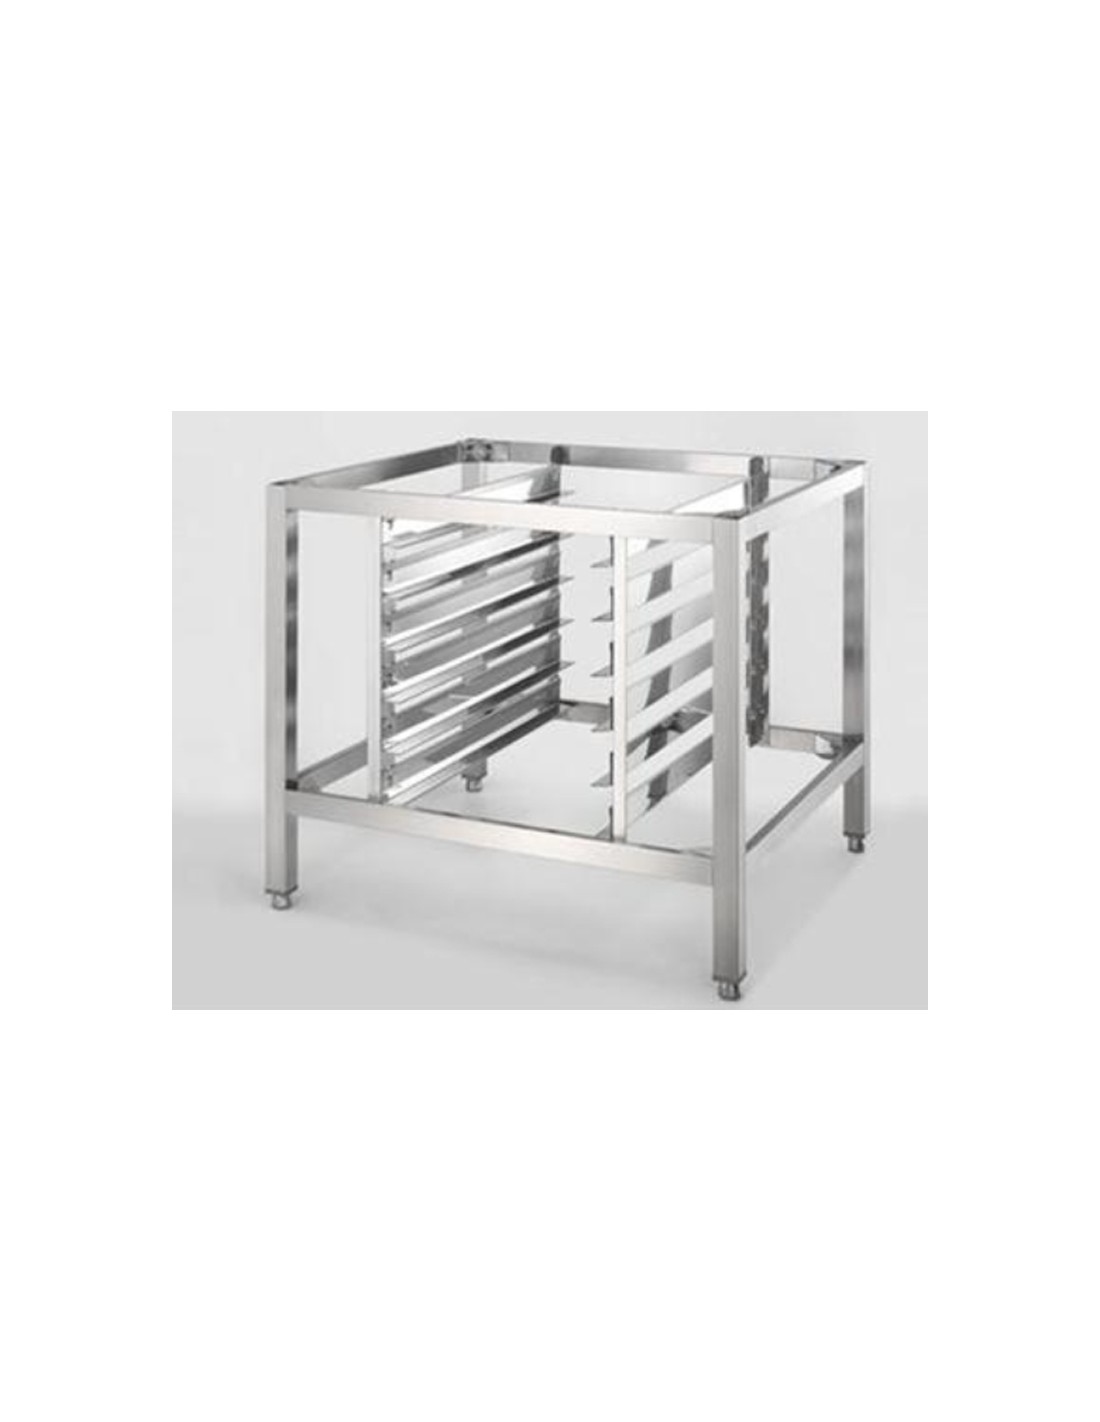 Stainless steel holder with racks - Capacity no. 5 pans - Gourmet - GN1/1 height cm 61